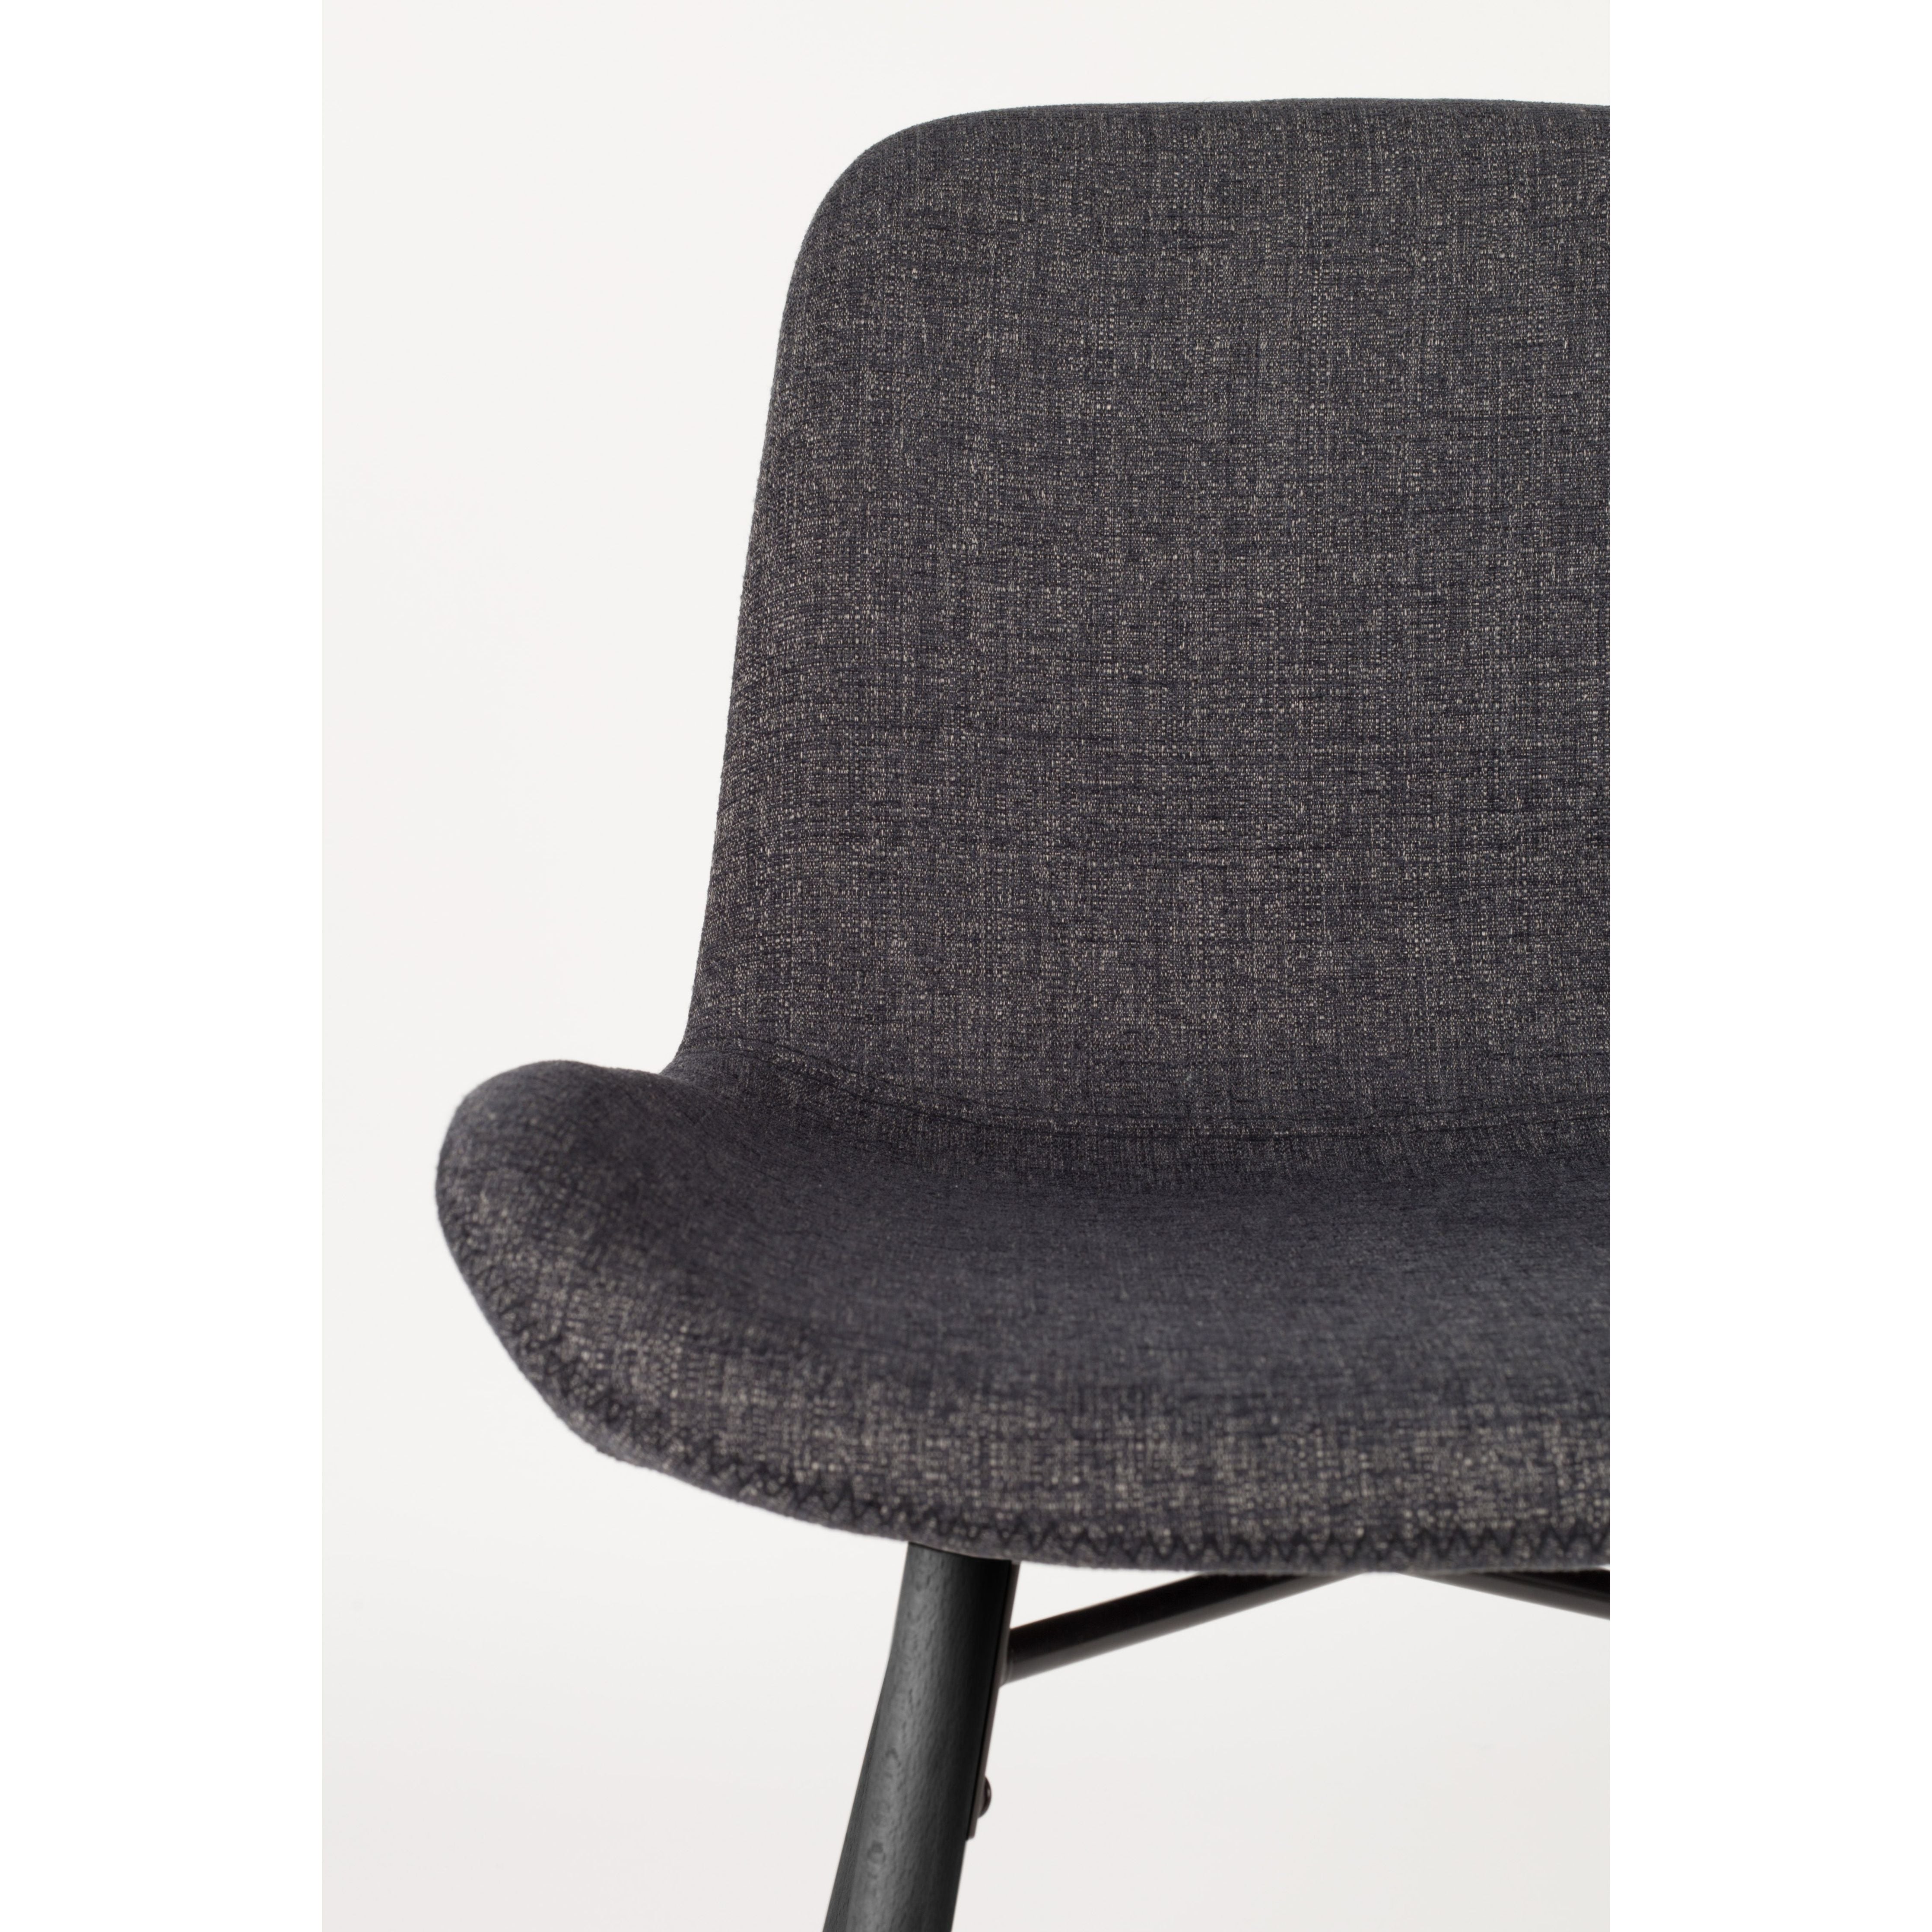 Chair lester anthracite